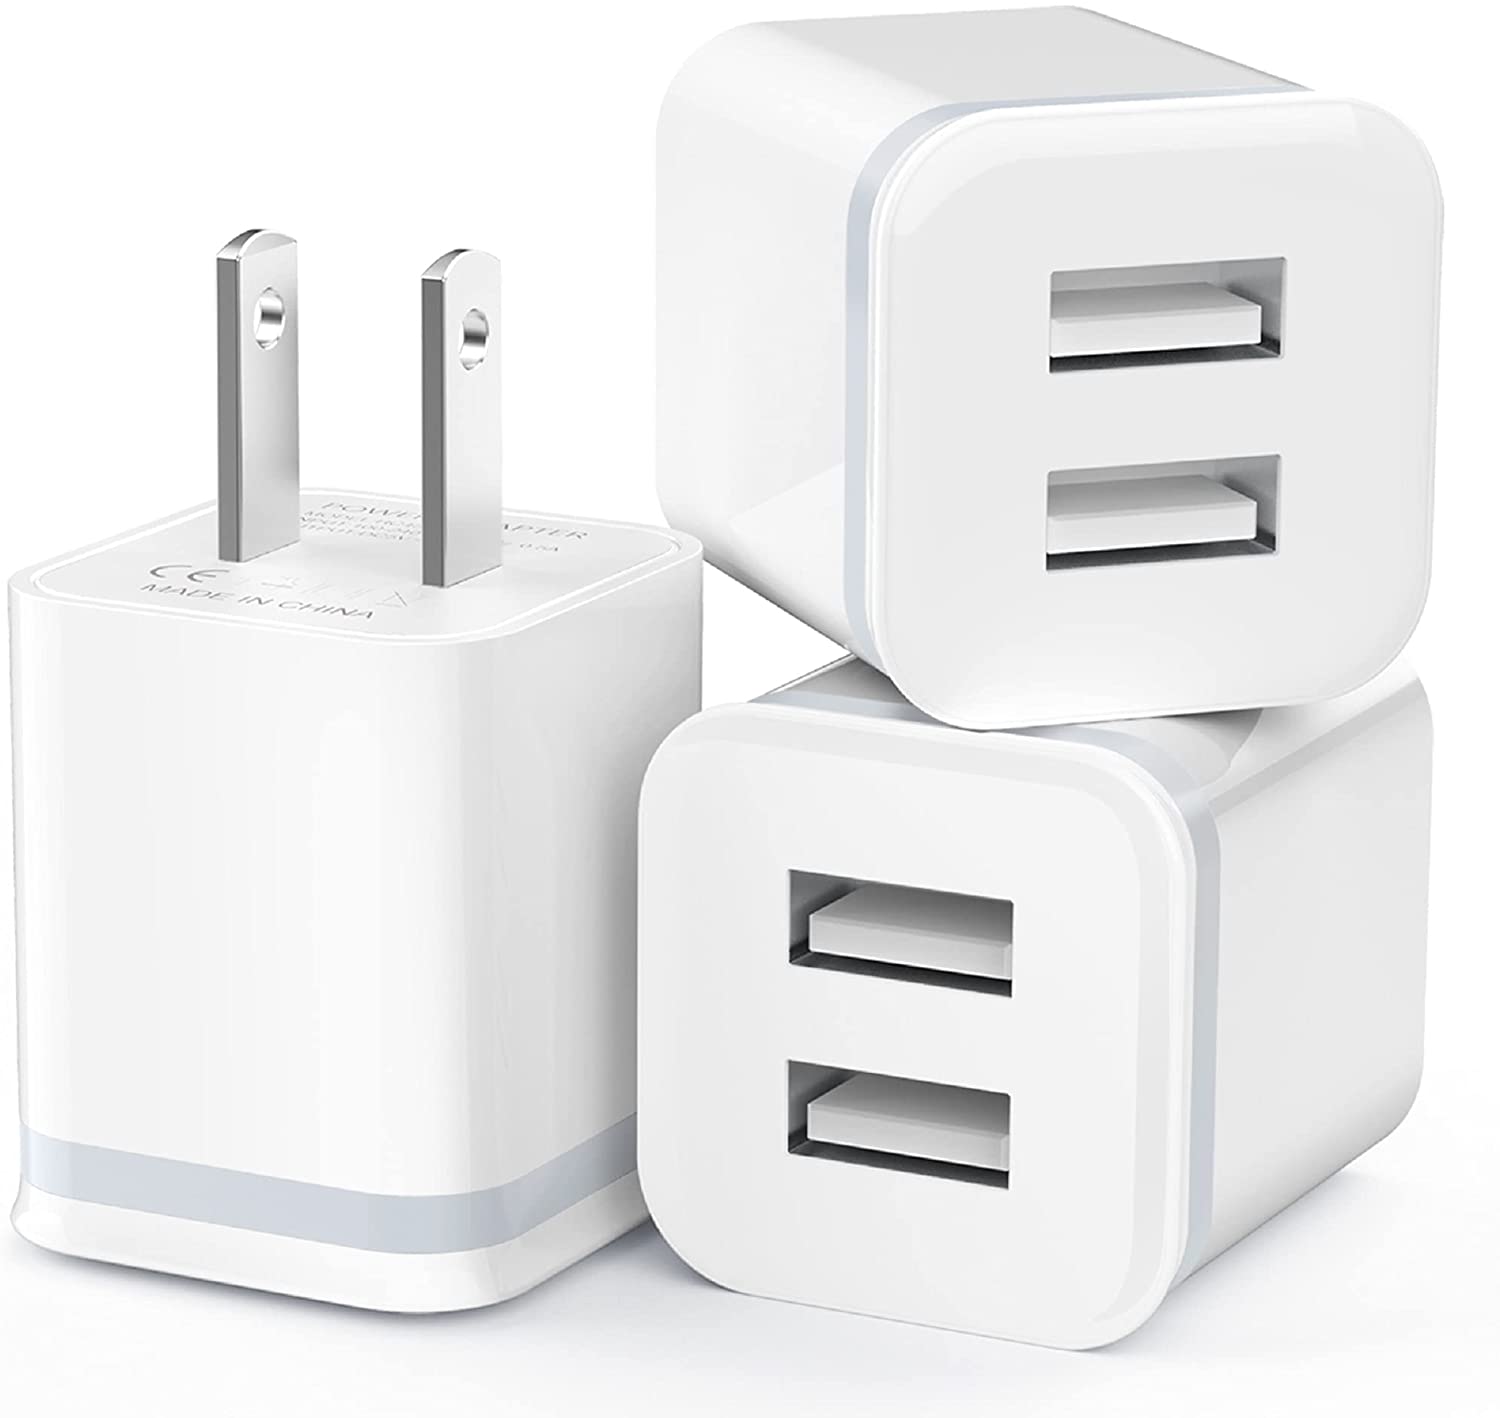 USB Wall Charger, Port USB Cube Power Adapter Charger Plug Charging Block